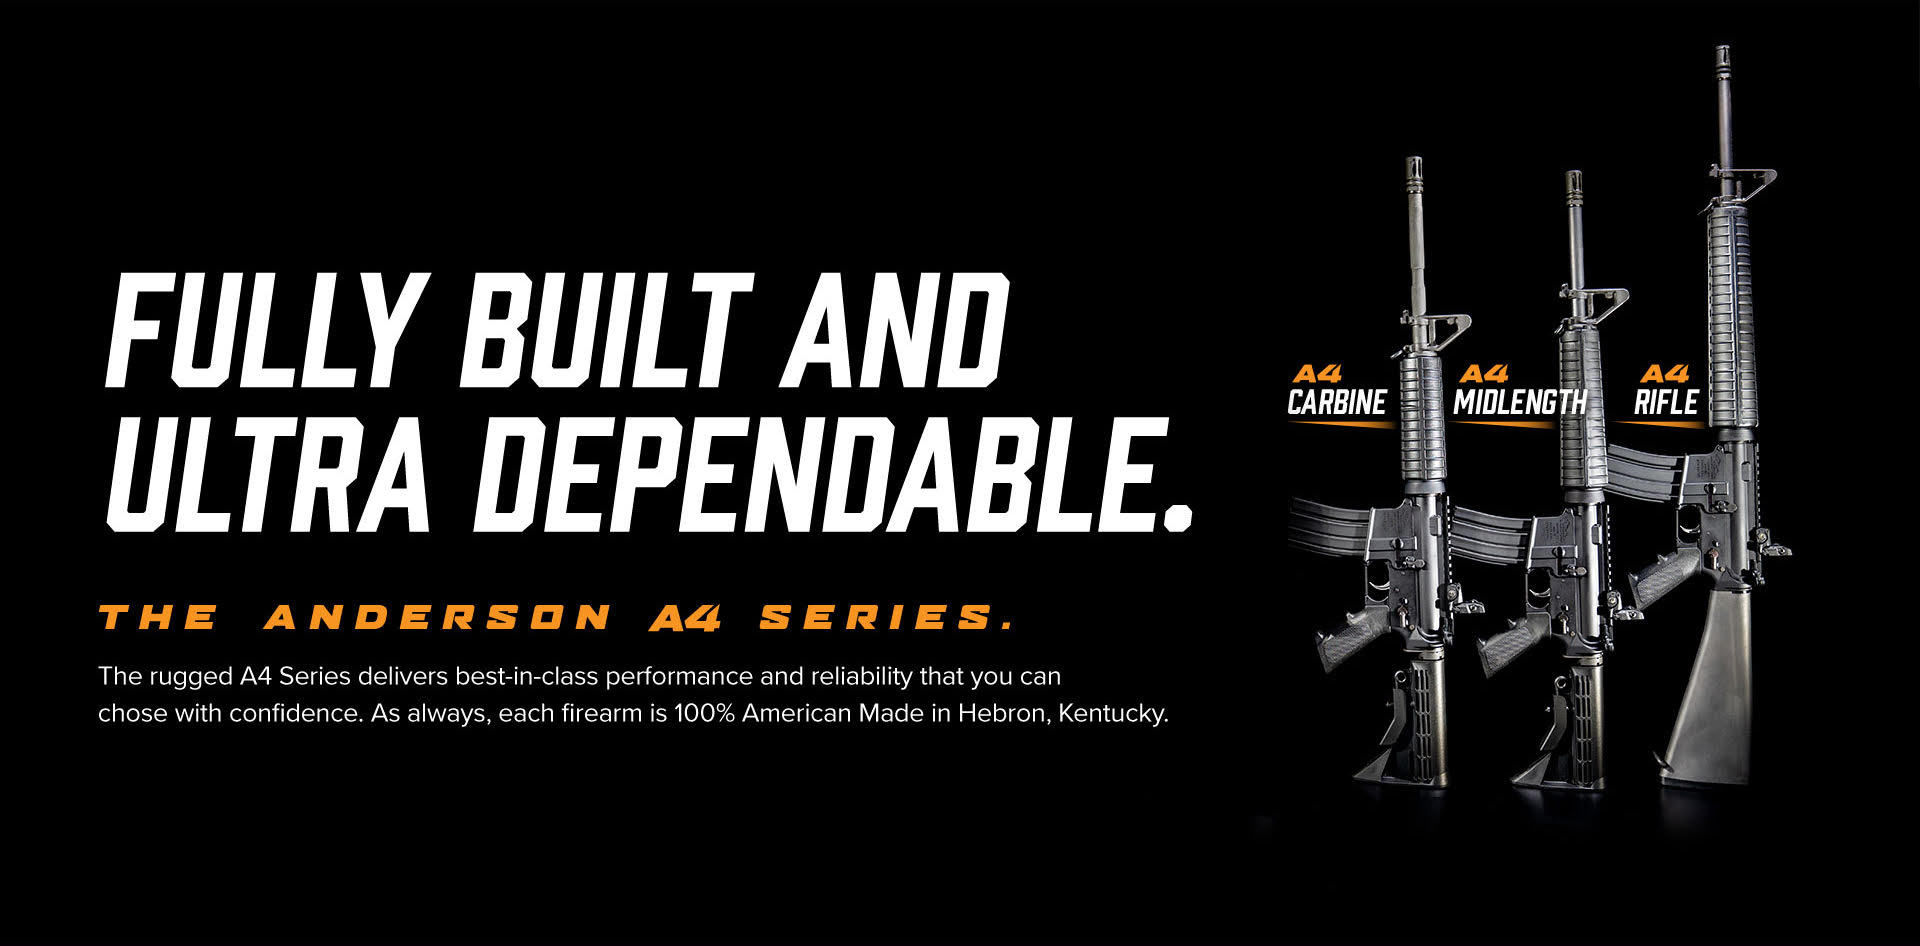 Fully built and ultra dependable.